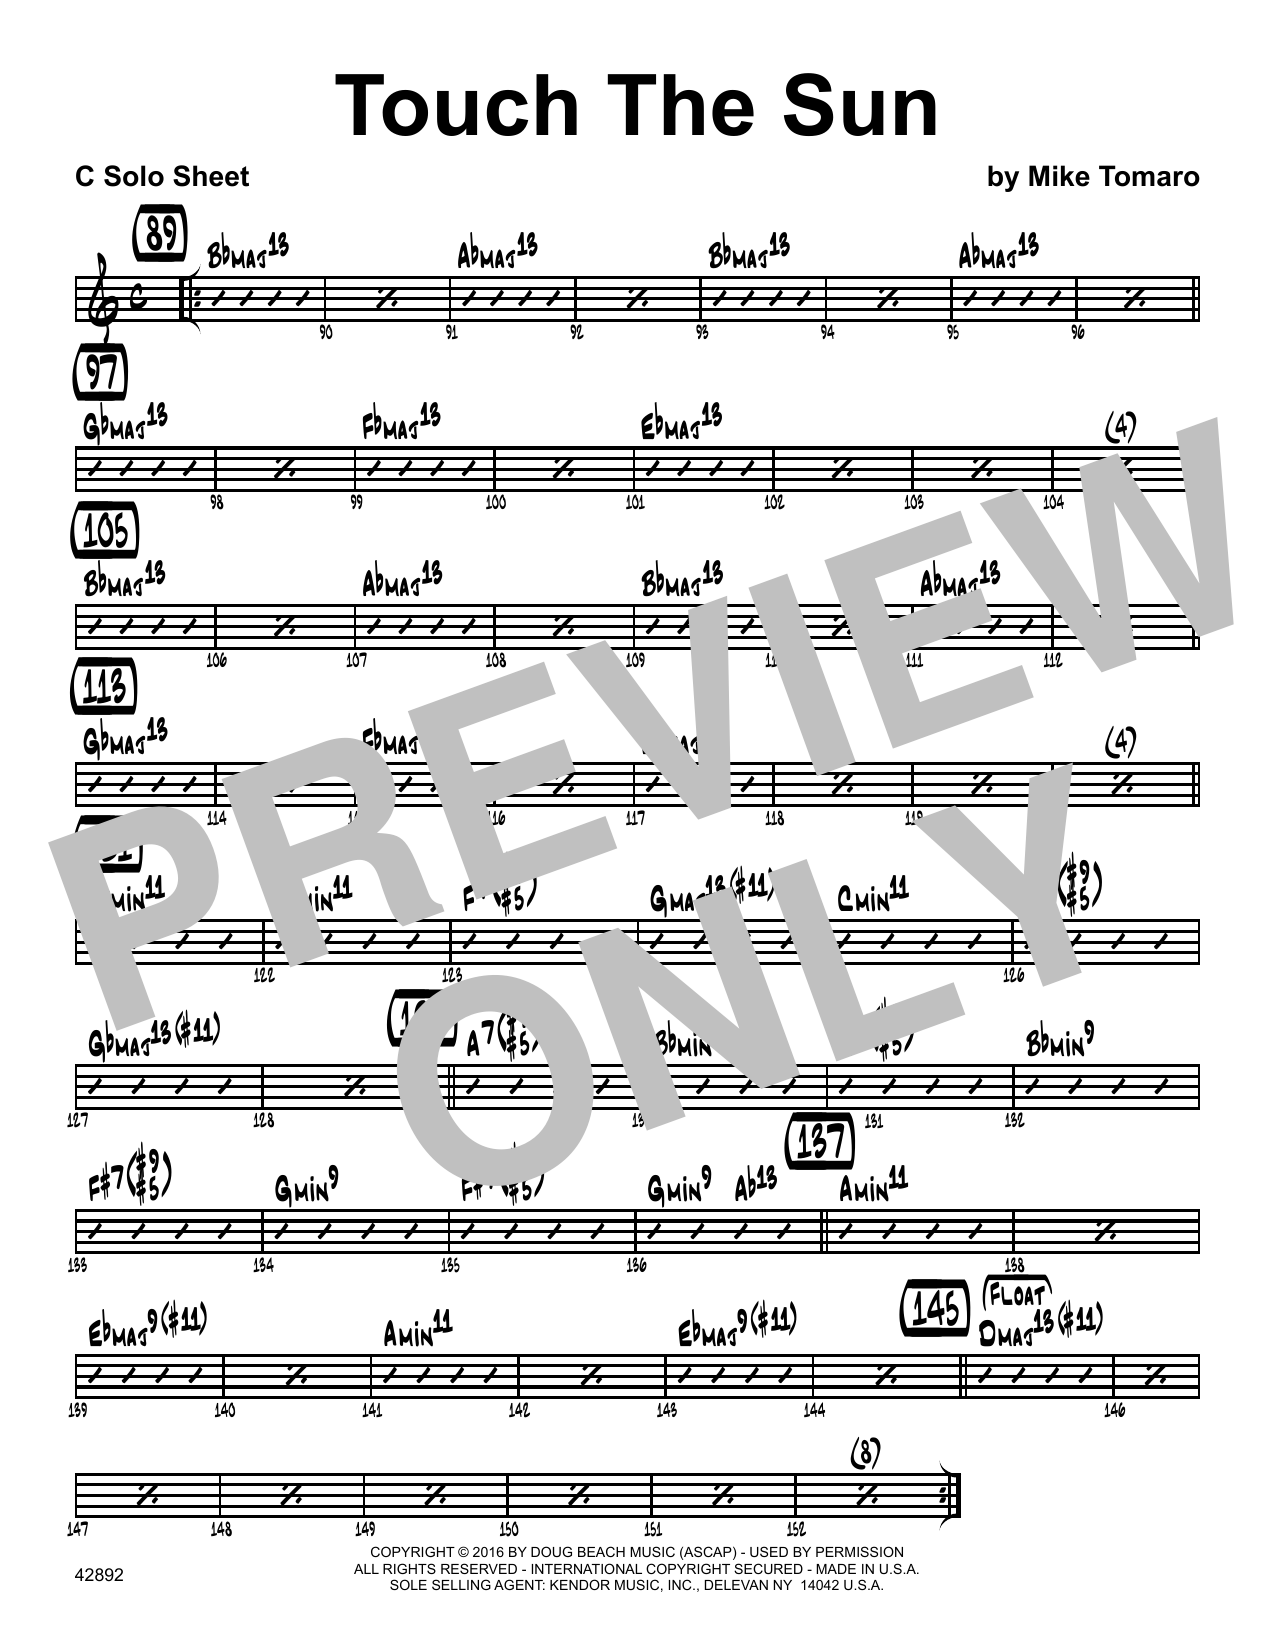 Download Mike Tomaro Touch The Sun - C Solo Sheet Sheet Music